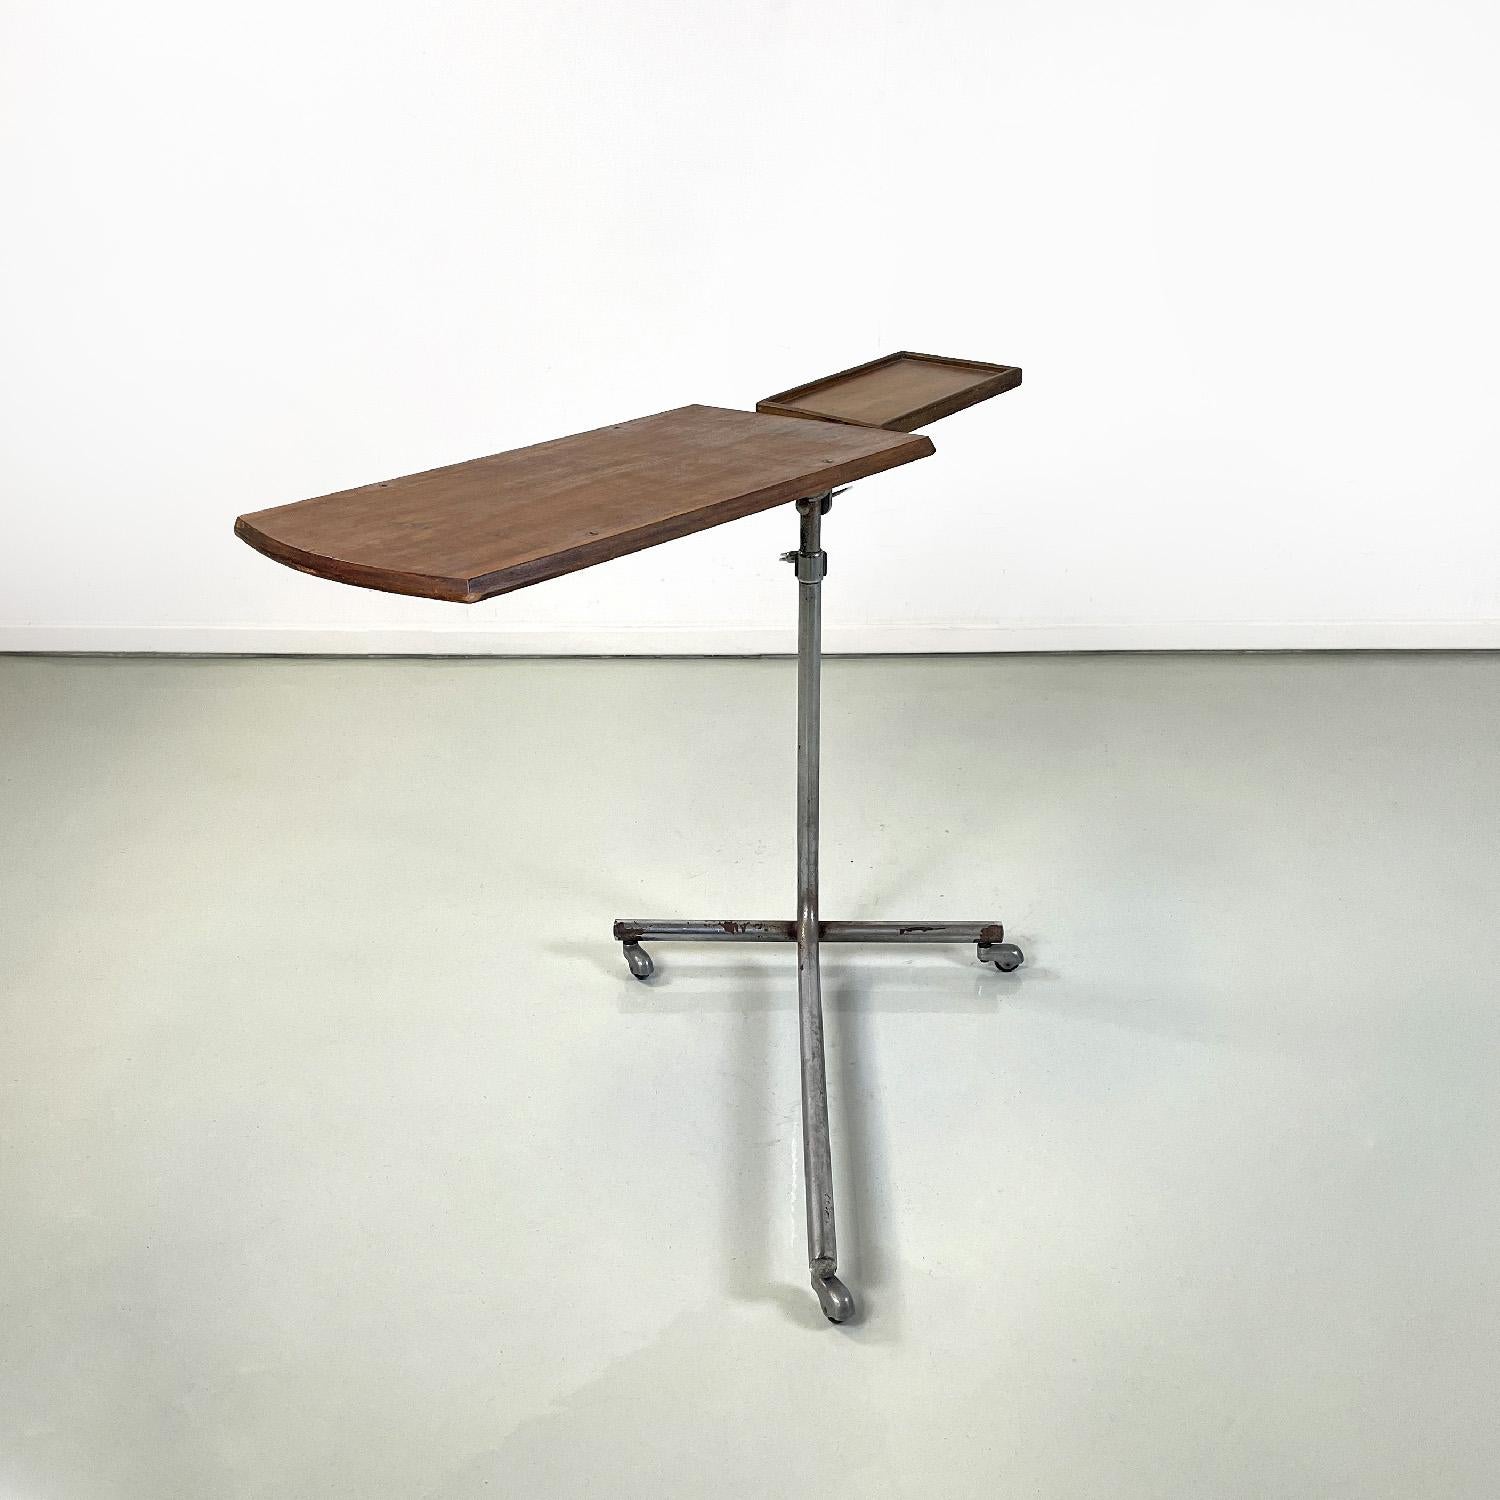 Mid-20th Century Italian mid-century modern wood and metal industrial work table, 1960s For Sale